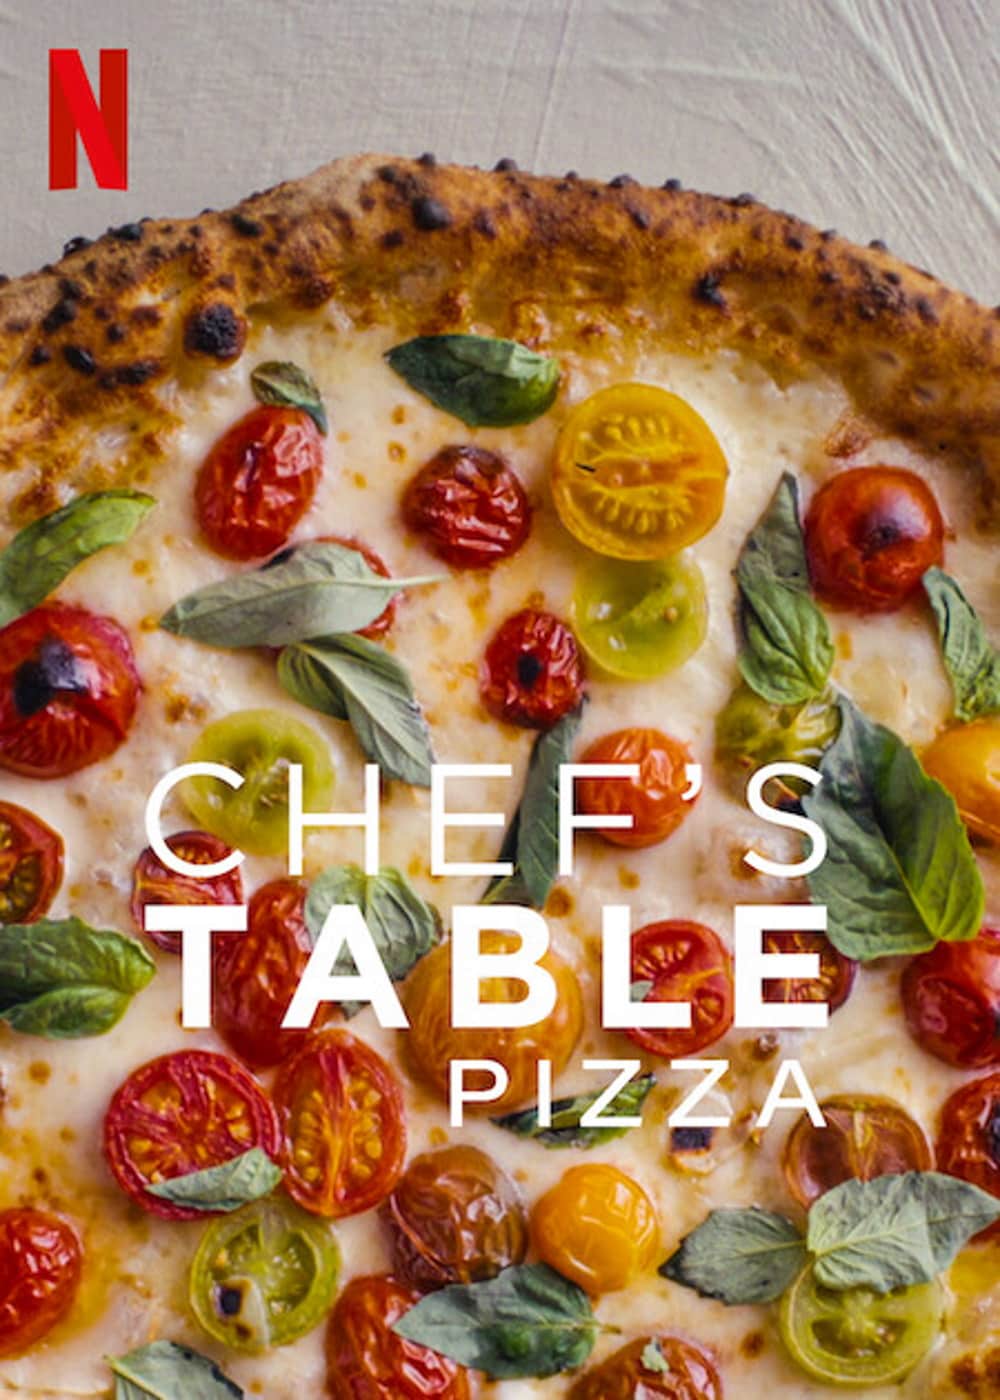 Is Chef’s Table Pizza (2022) available on Netflix